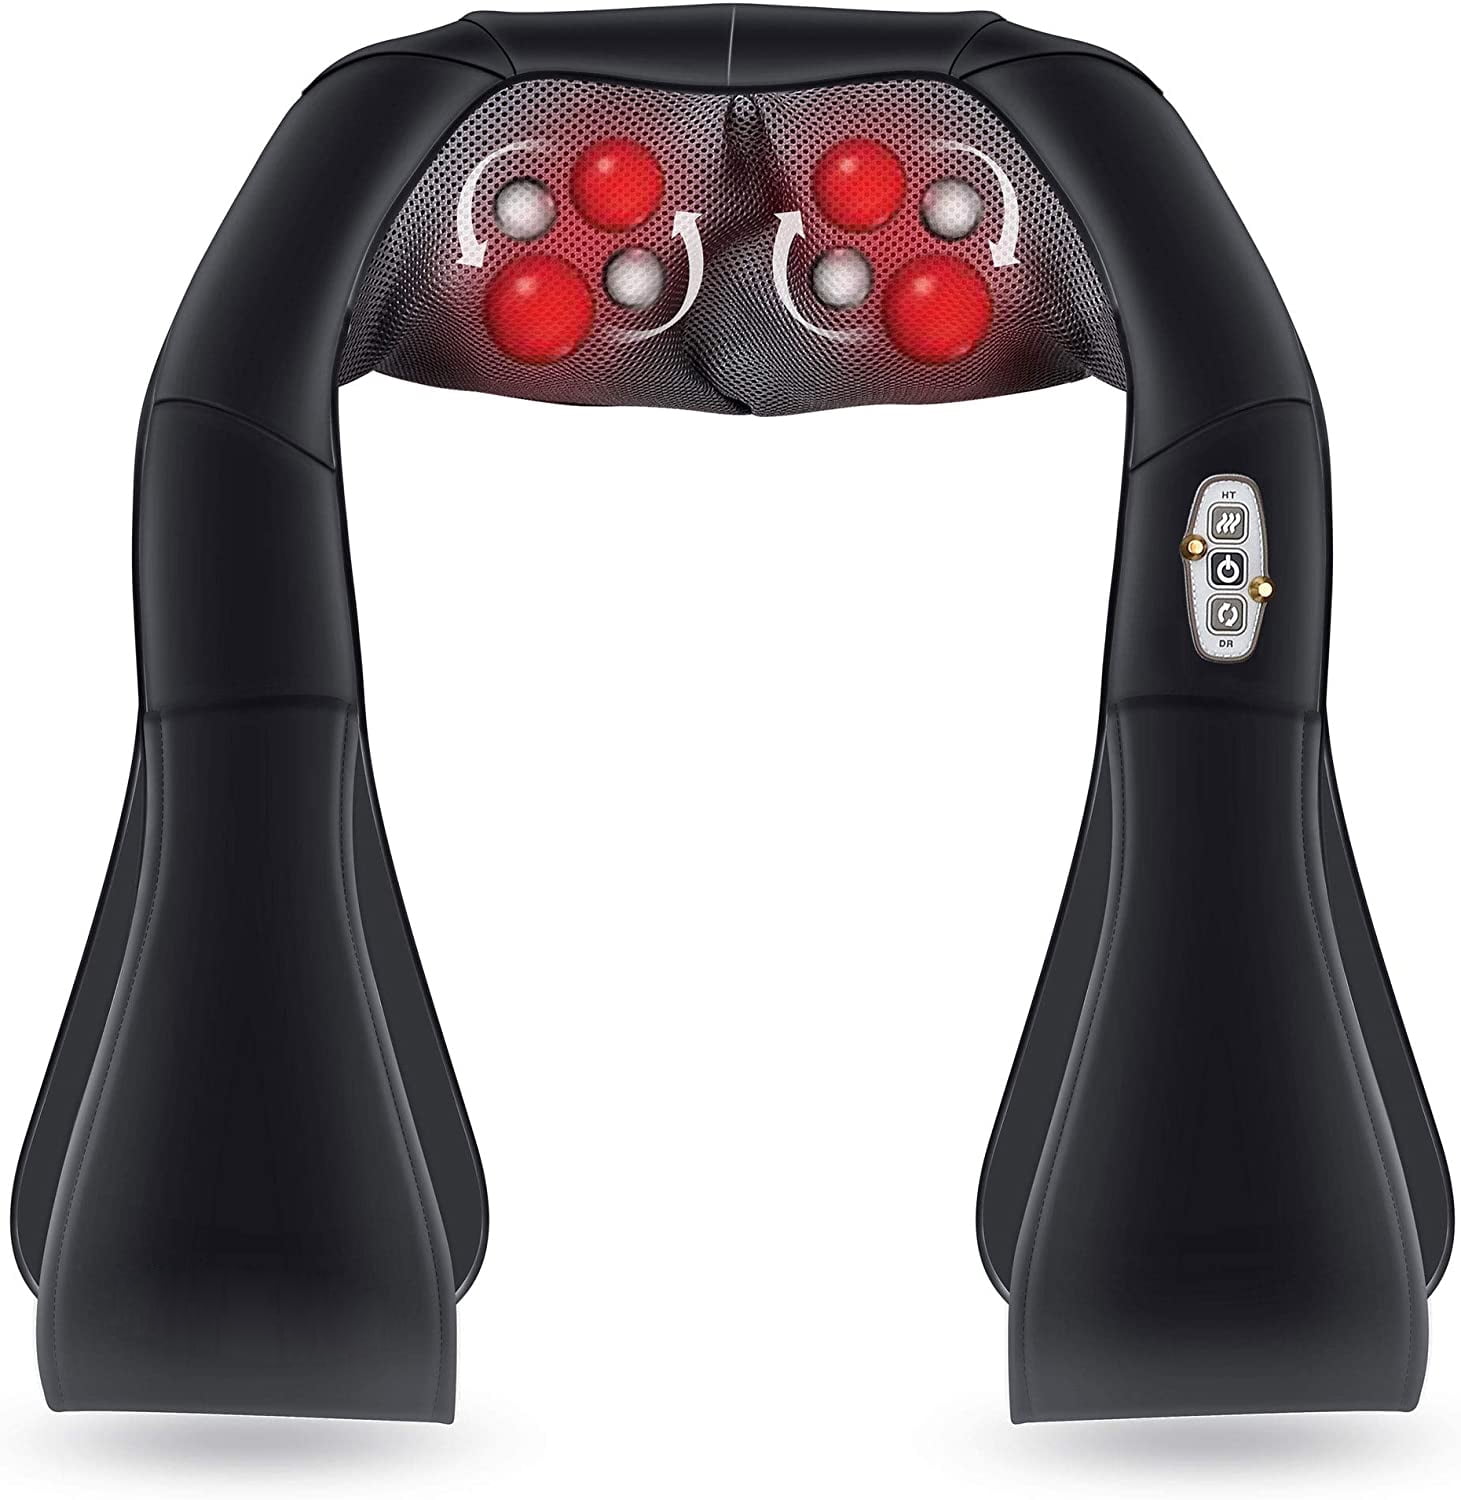 Rechargeable 5D Infrared Heated Shiatsu Back Neck Massager For Neck And  Shoulders Perfect For Car And Home Massage, Health Care Gift Idea 231006  From Piao007, $57.77